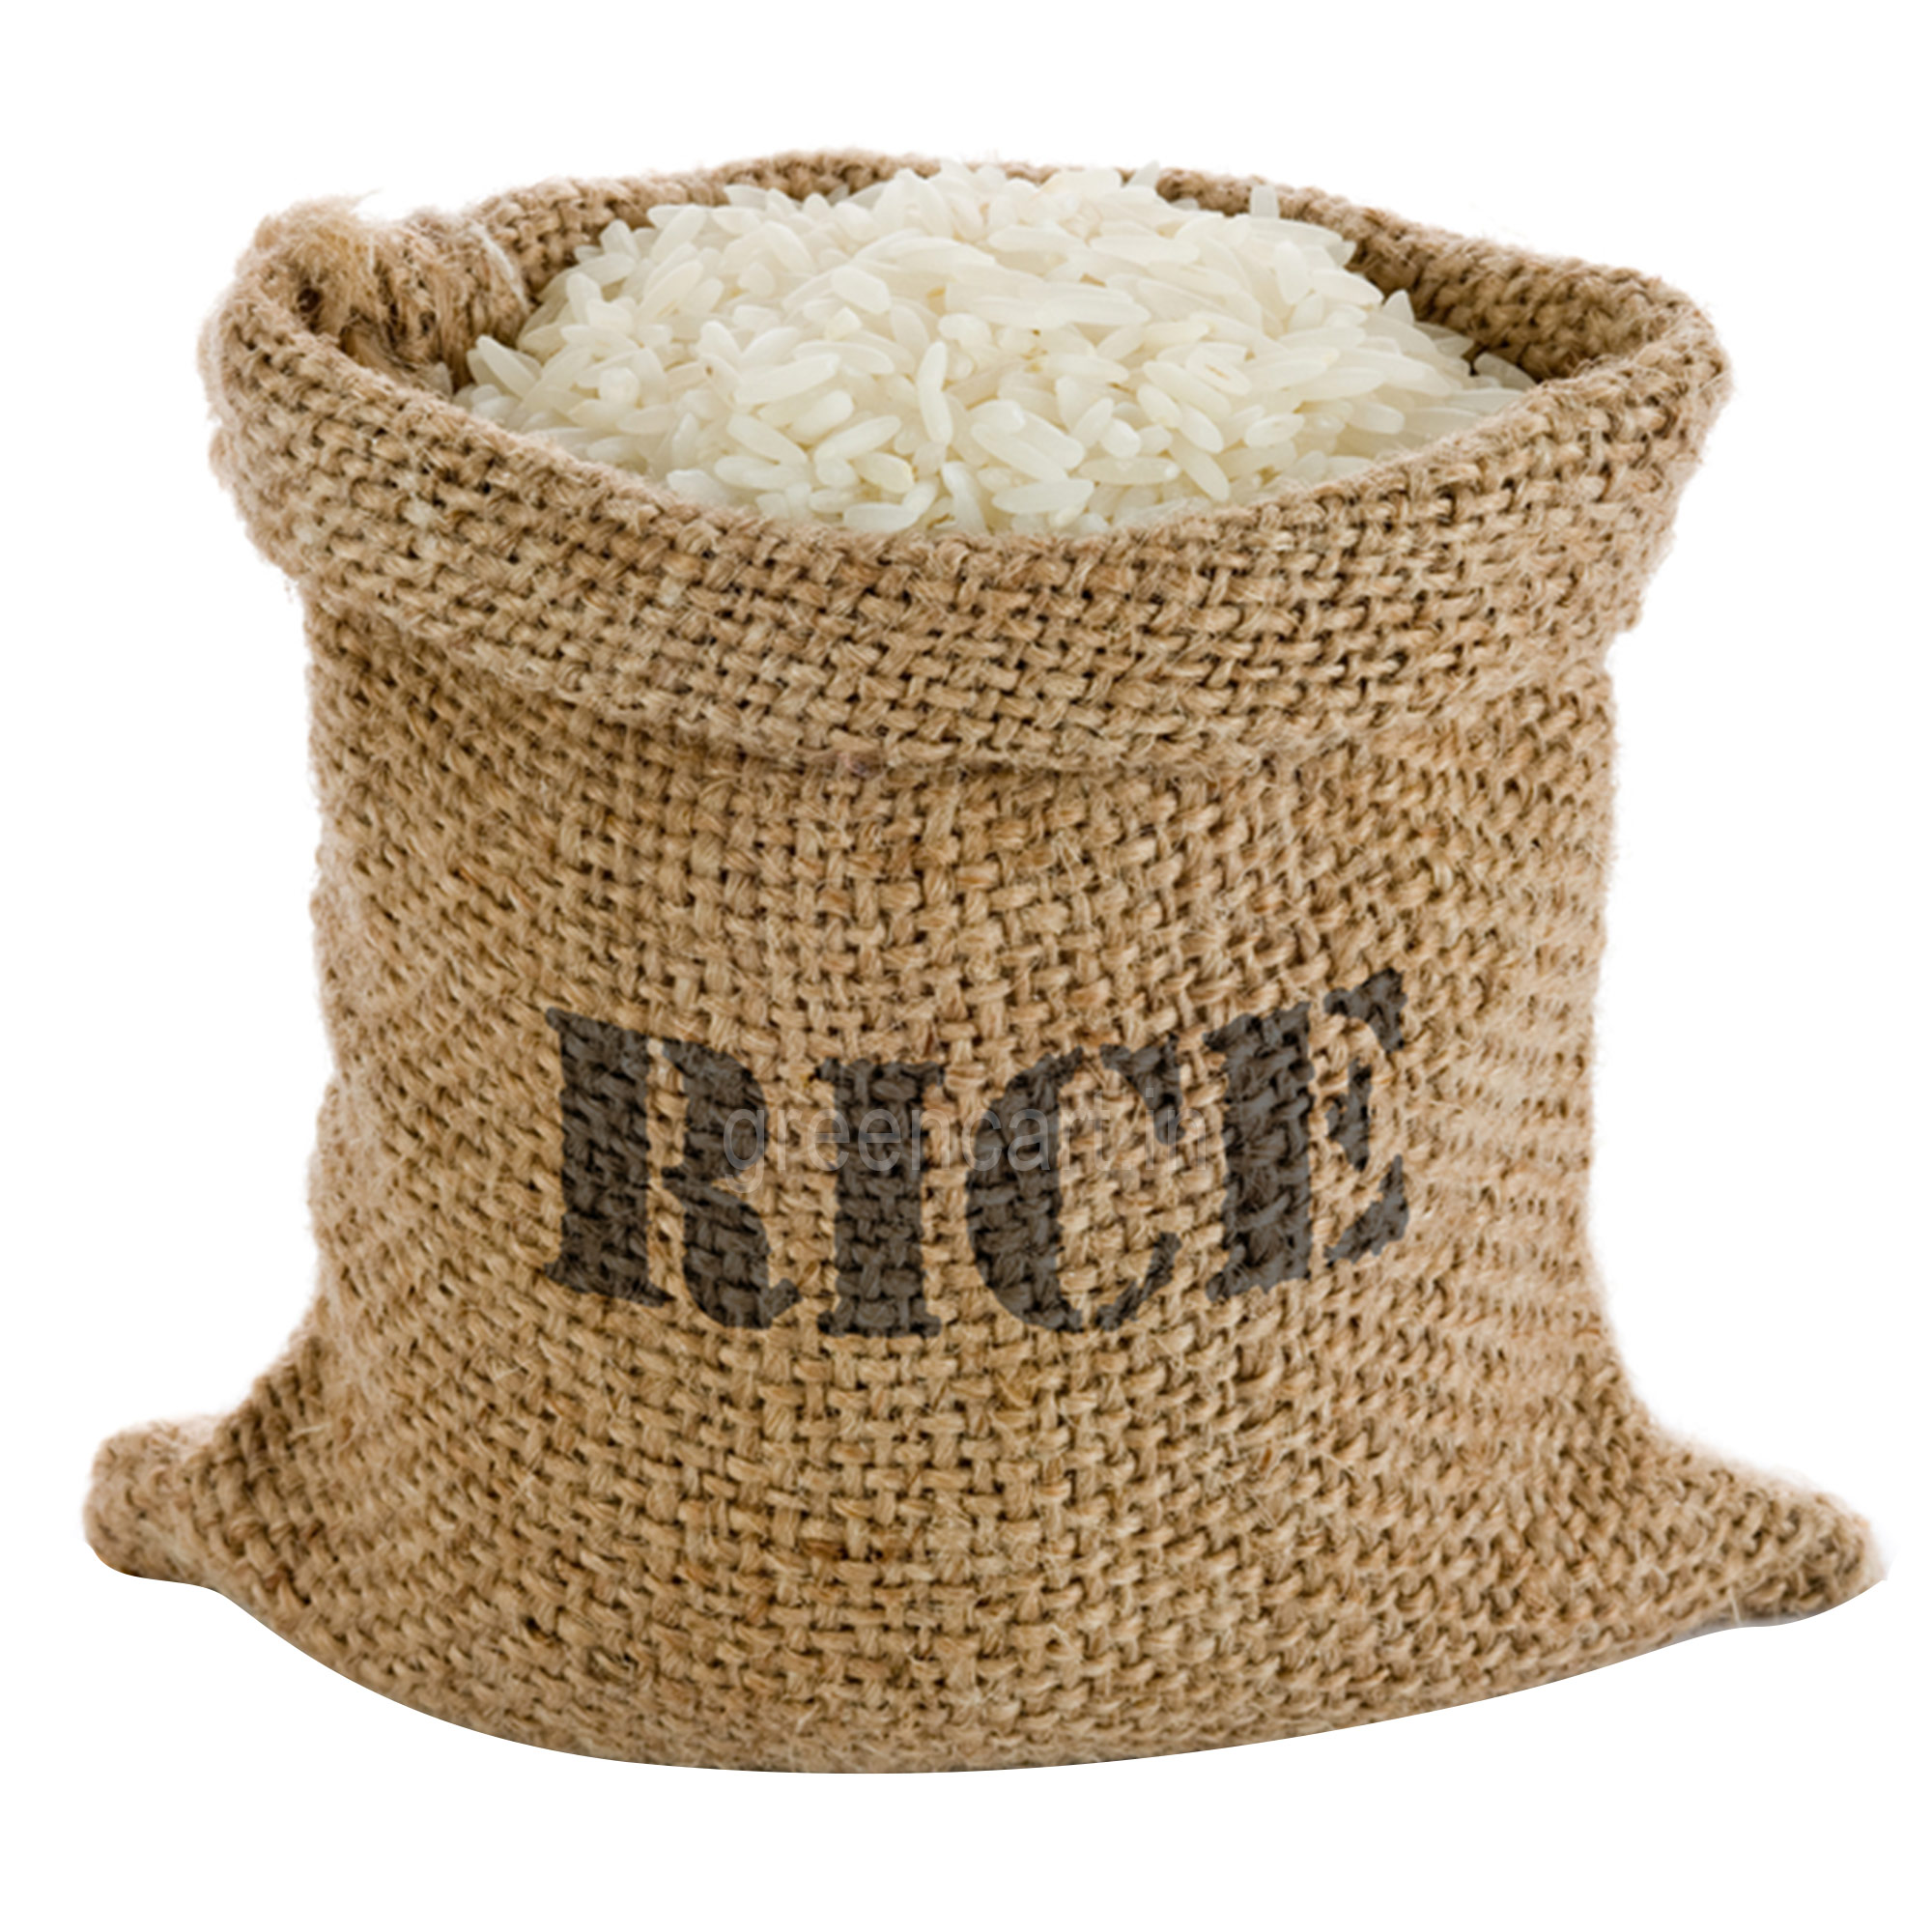 rice clipart rice packet